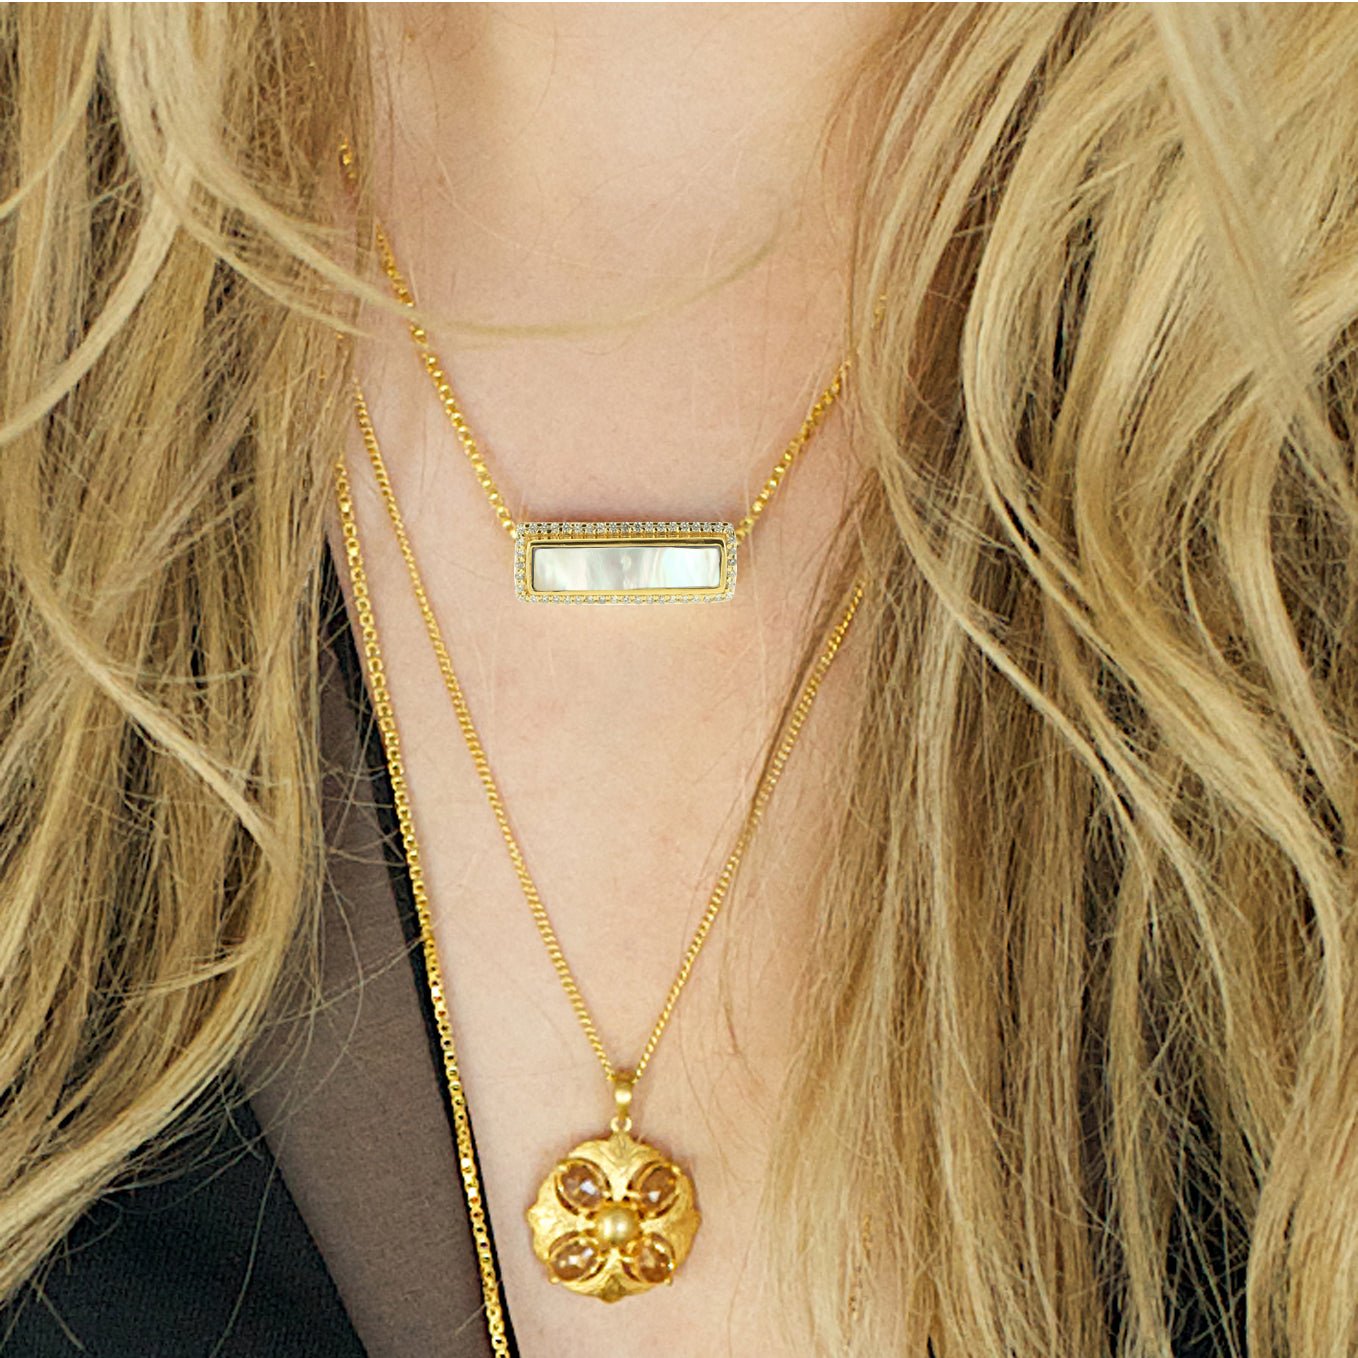 MINI ENDEAR NECKLACE - SWAROVSKI CRYSTAL, MOTHER OF PEARL & GOLD - SO PRETTY CARA COTTER